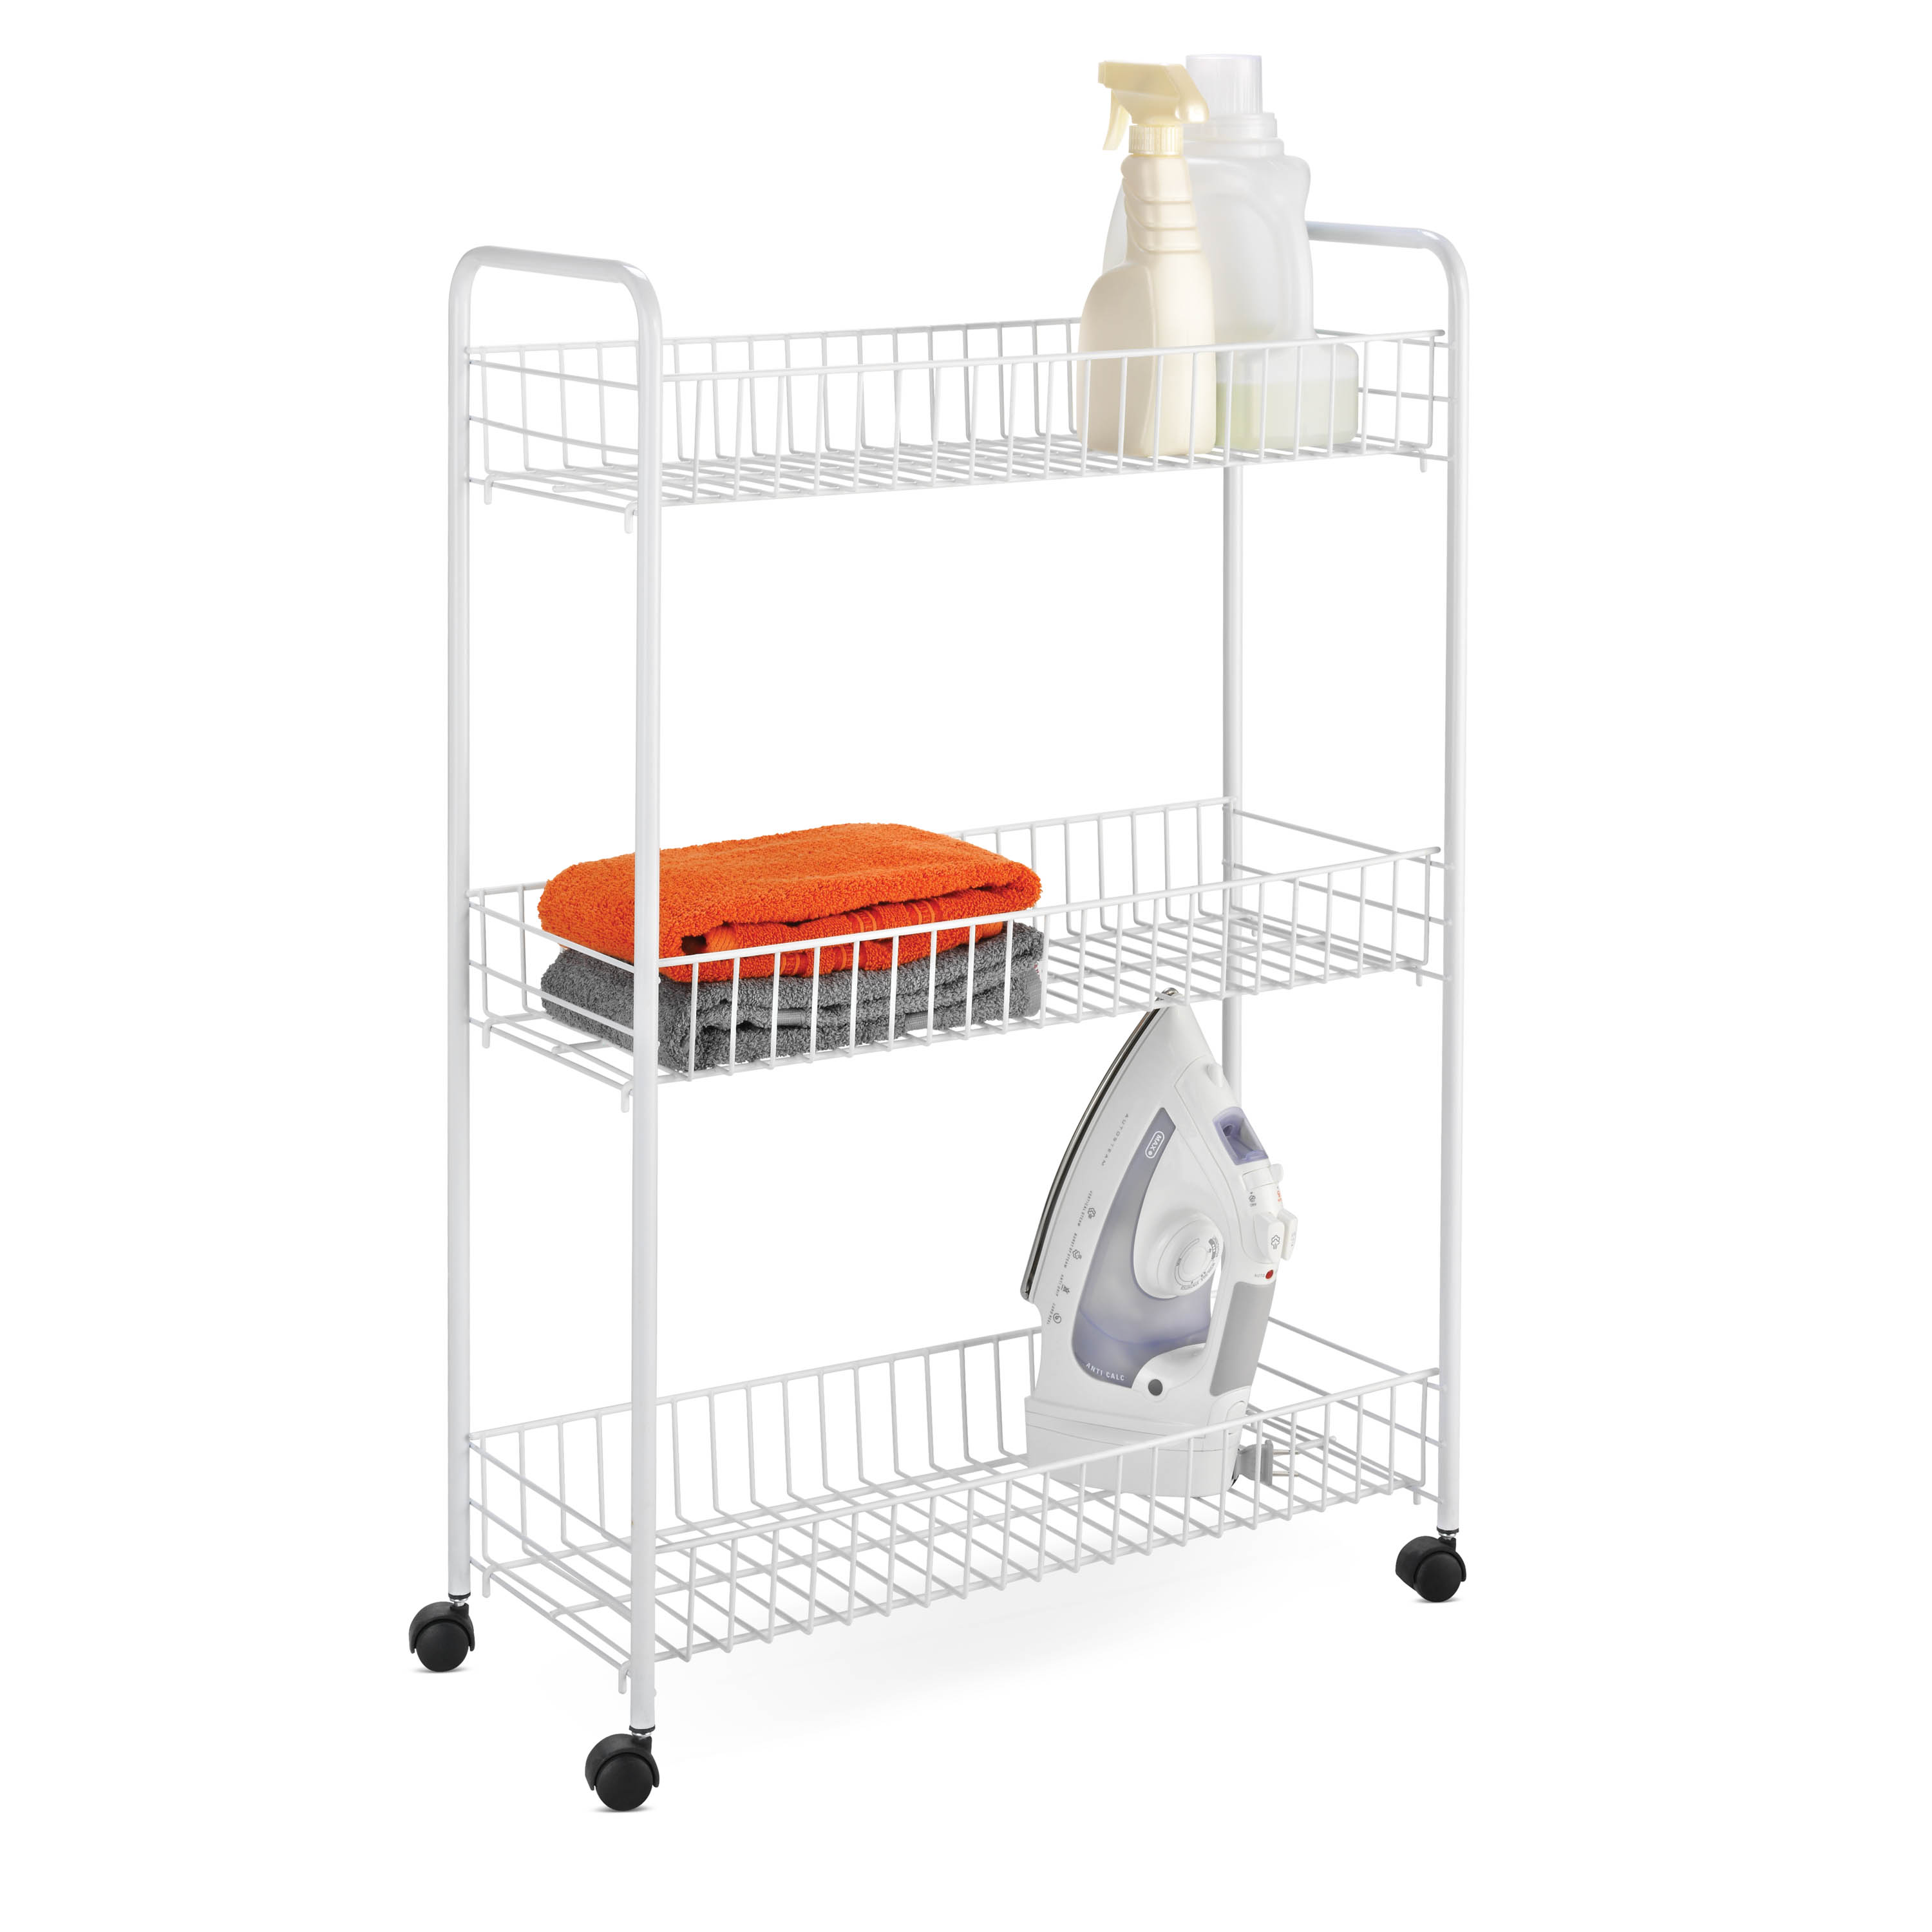 Honey-Can-Do 3-Tier Rolling Steel Storage Cart, White - image 4 of 7